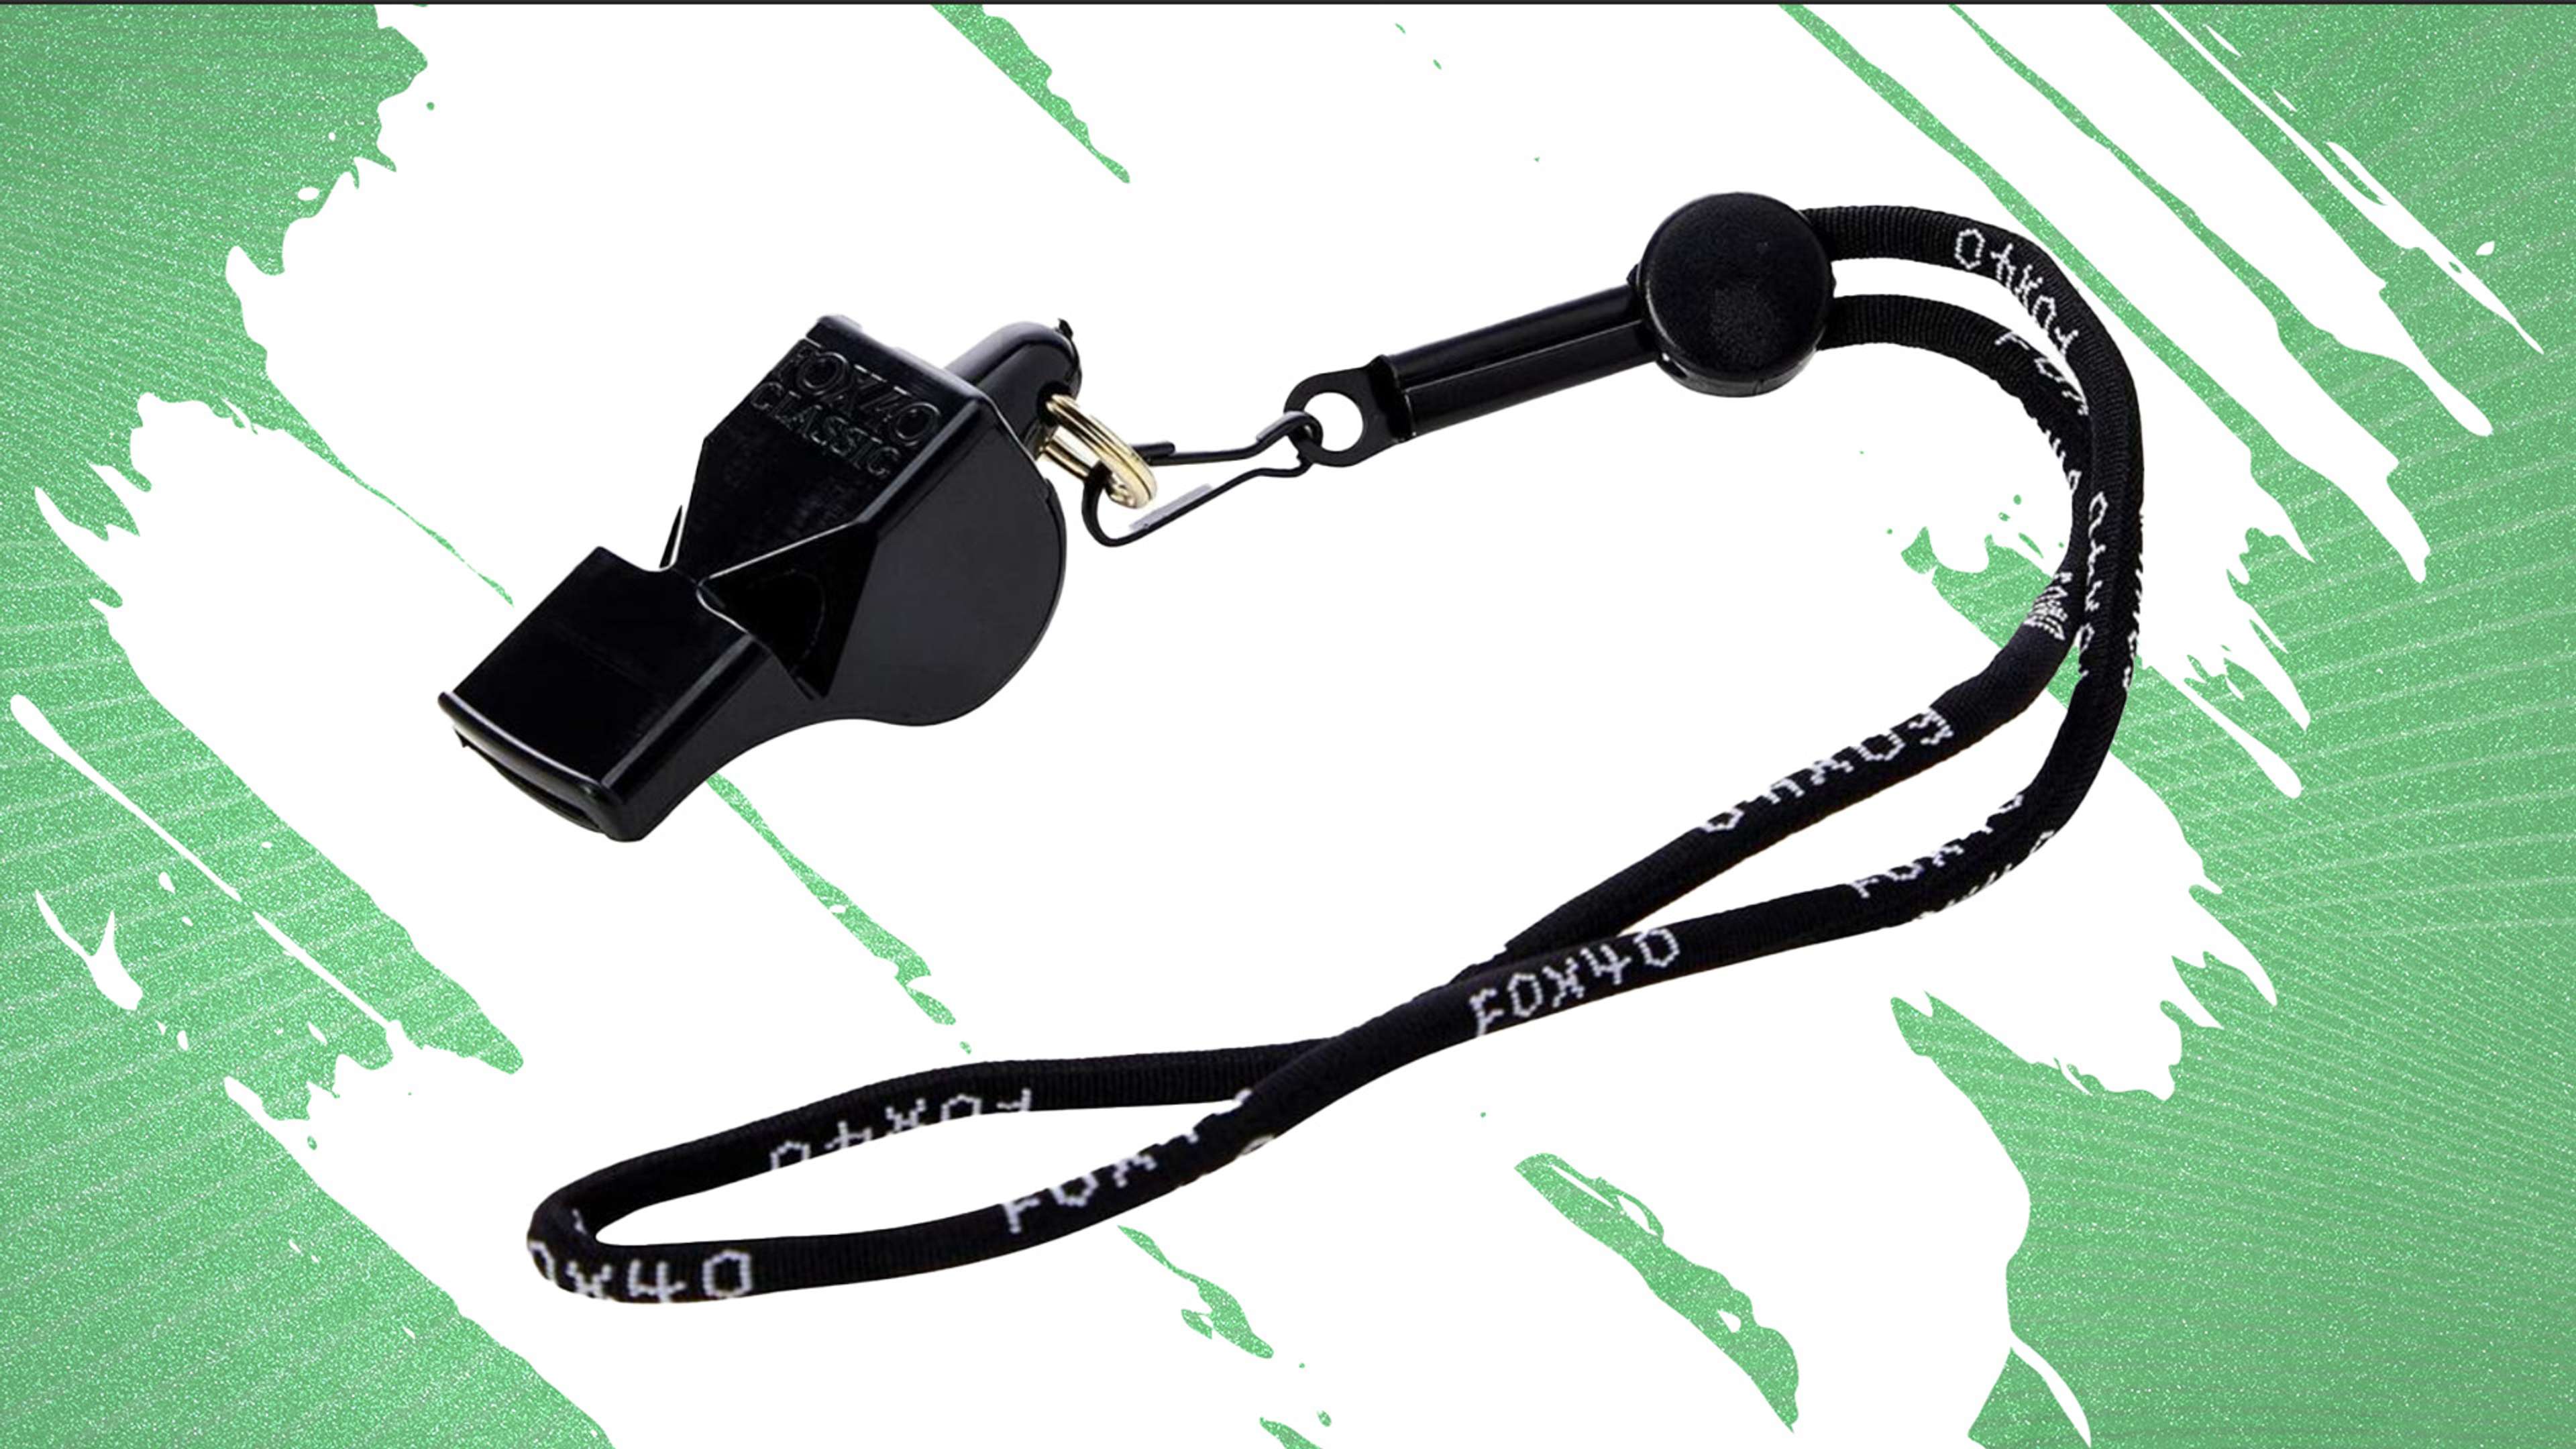 Fox 40 whistle with wrist strap 